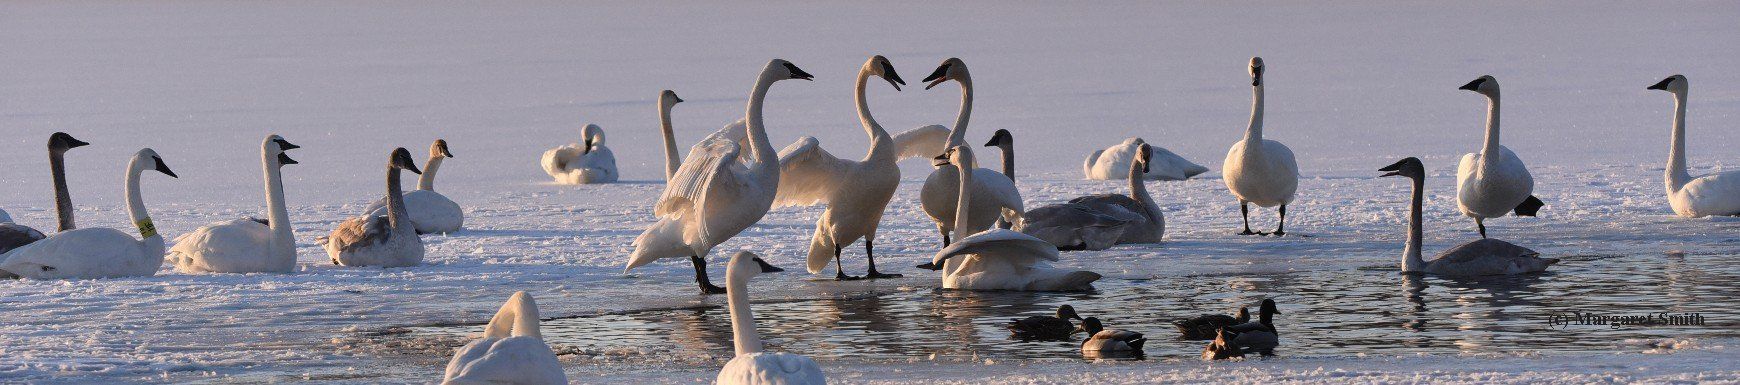 The Trumpeter Swan Society Blog has insights, commentary, and thoughtful discussion about trumpeter swan issues and activities